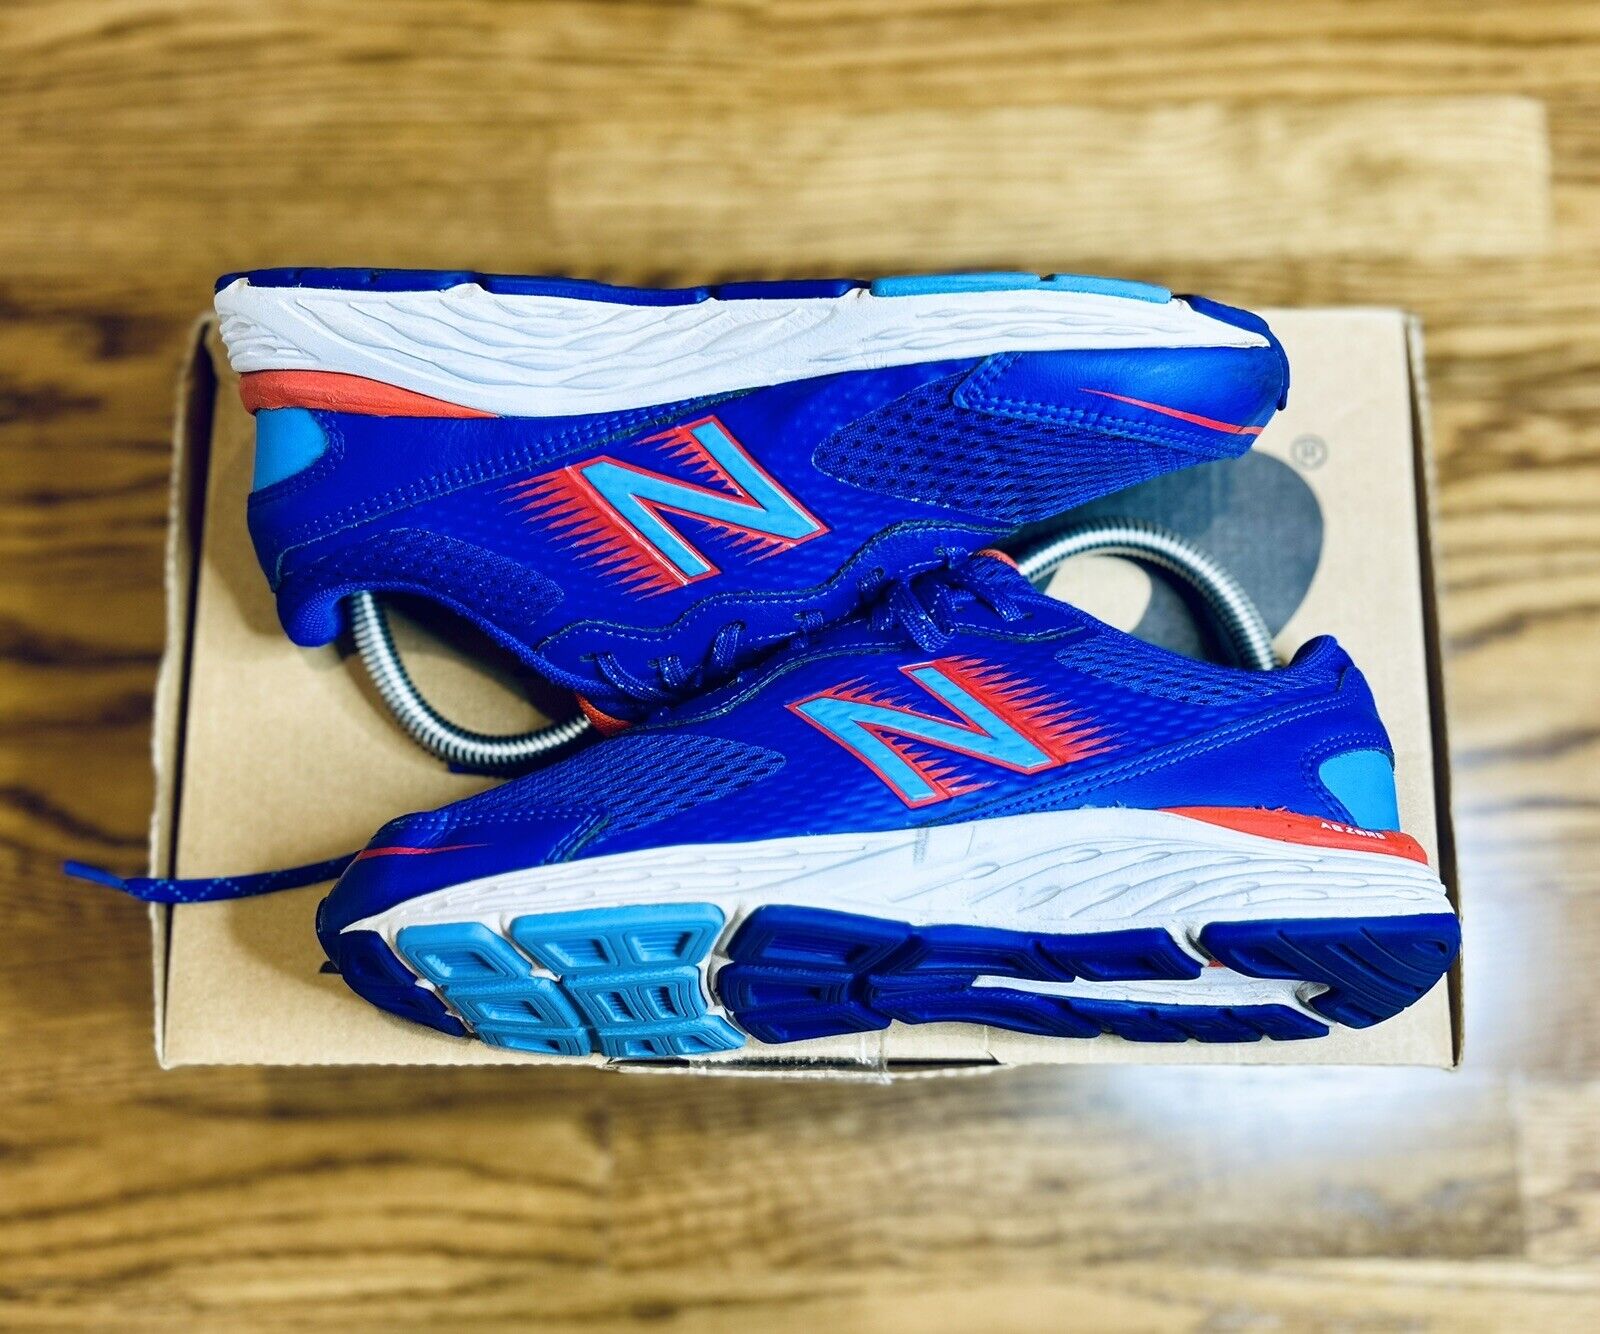 New Balance 680 V6 Running Shoes Infinity Blue/Neo Flame Kids Sz 6.5 Sneakers